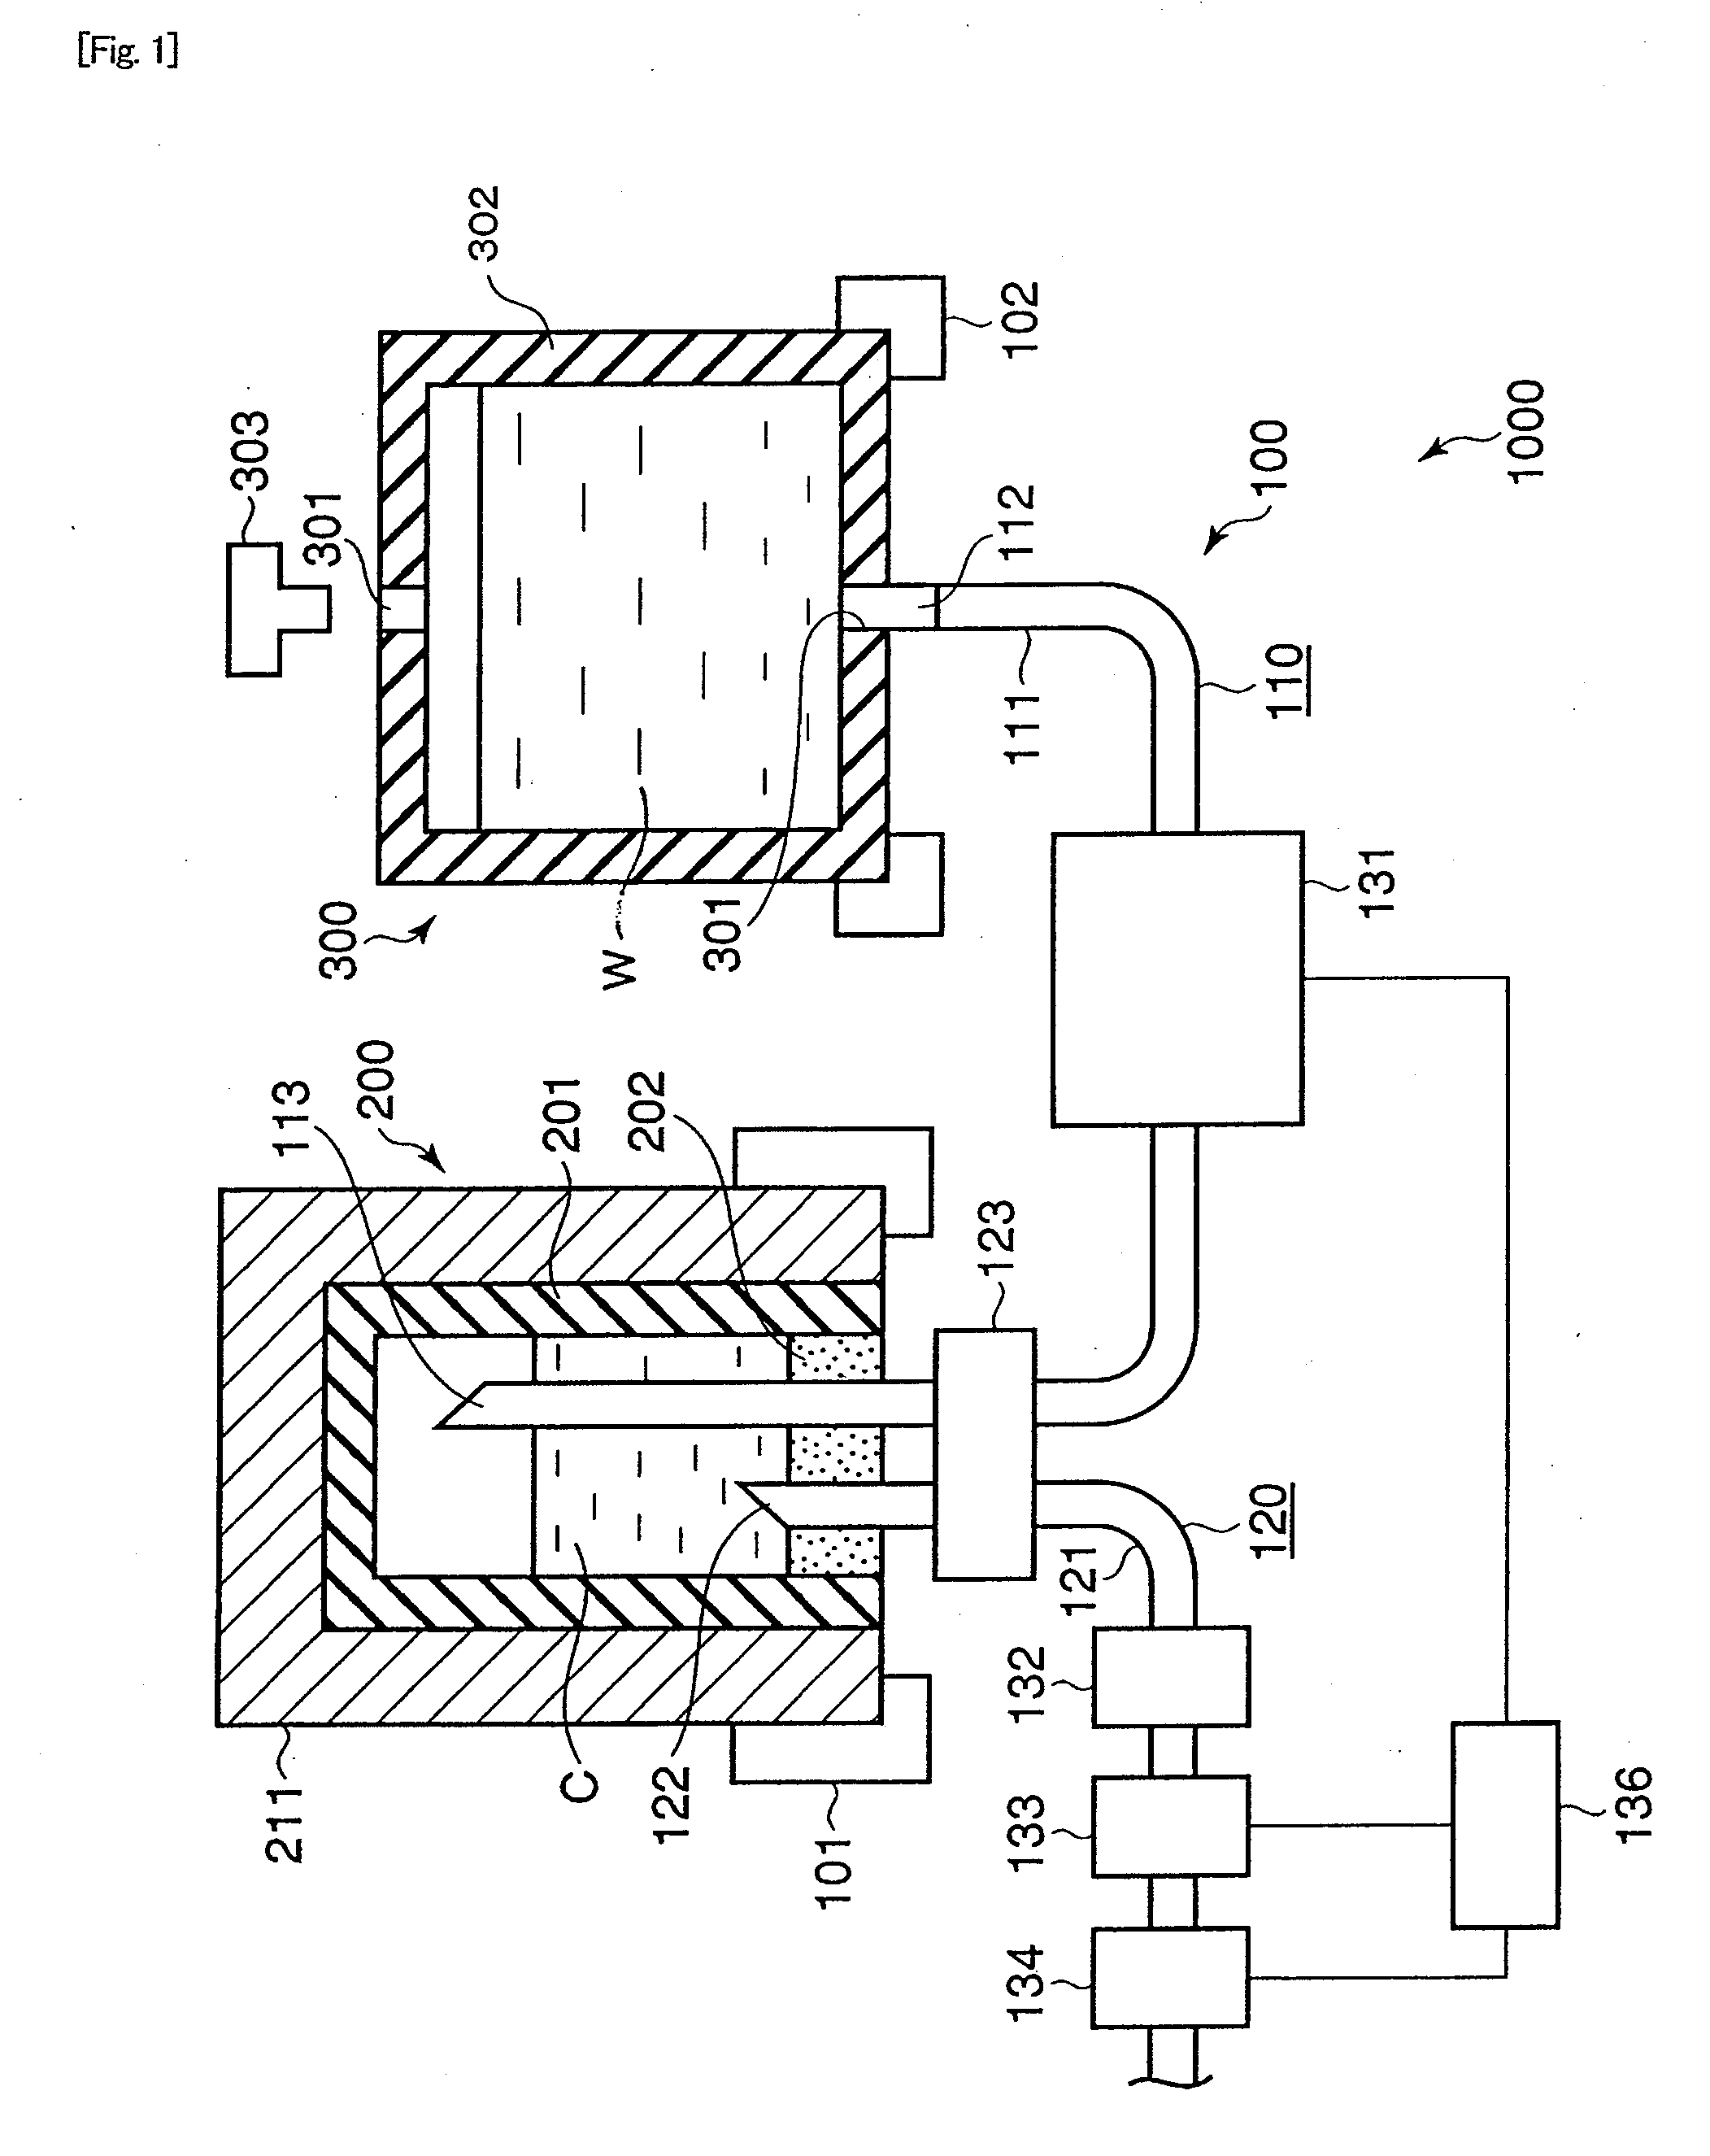 Chemical Liquid Injection System